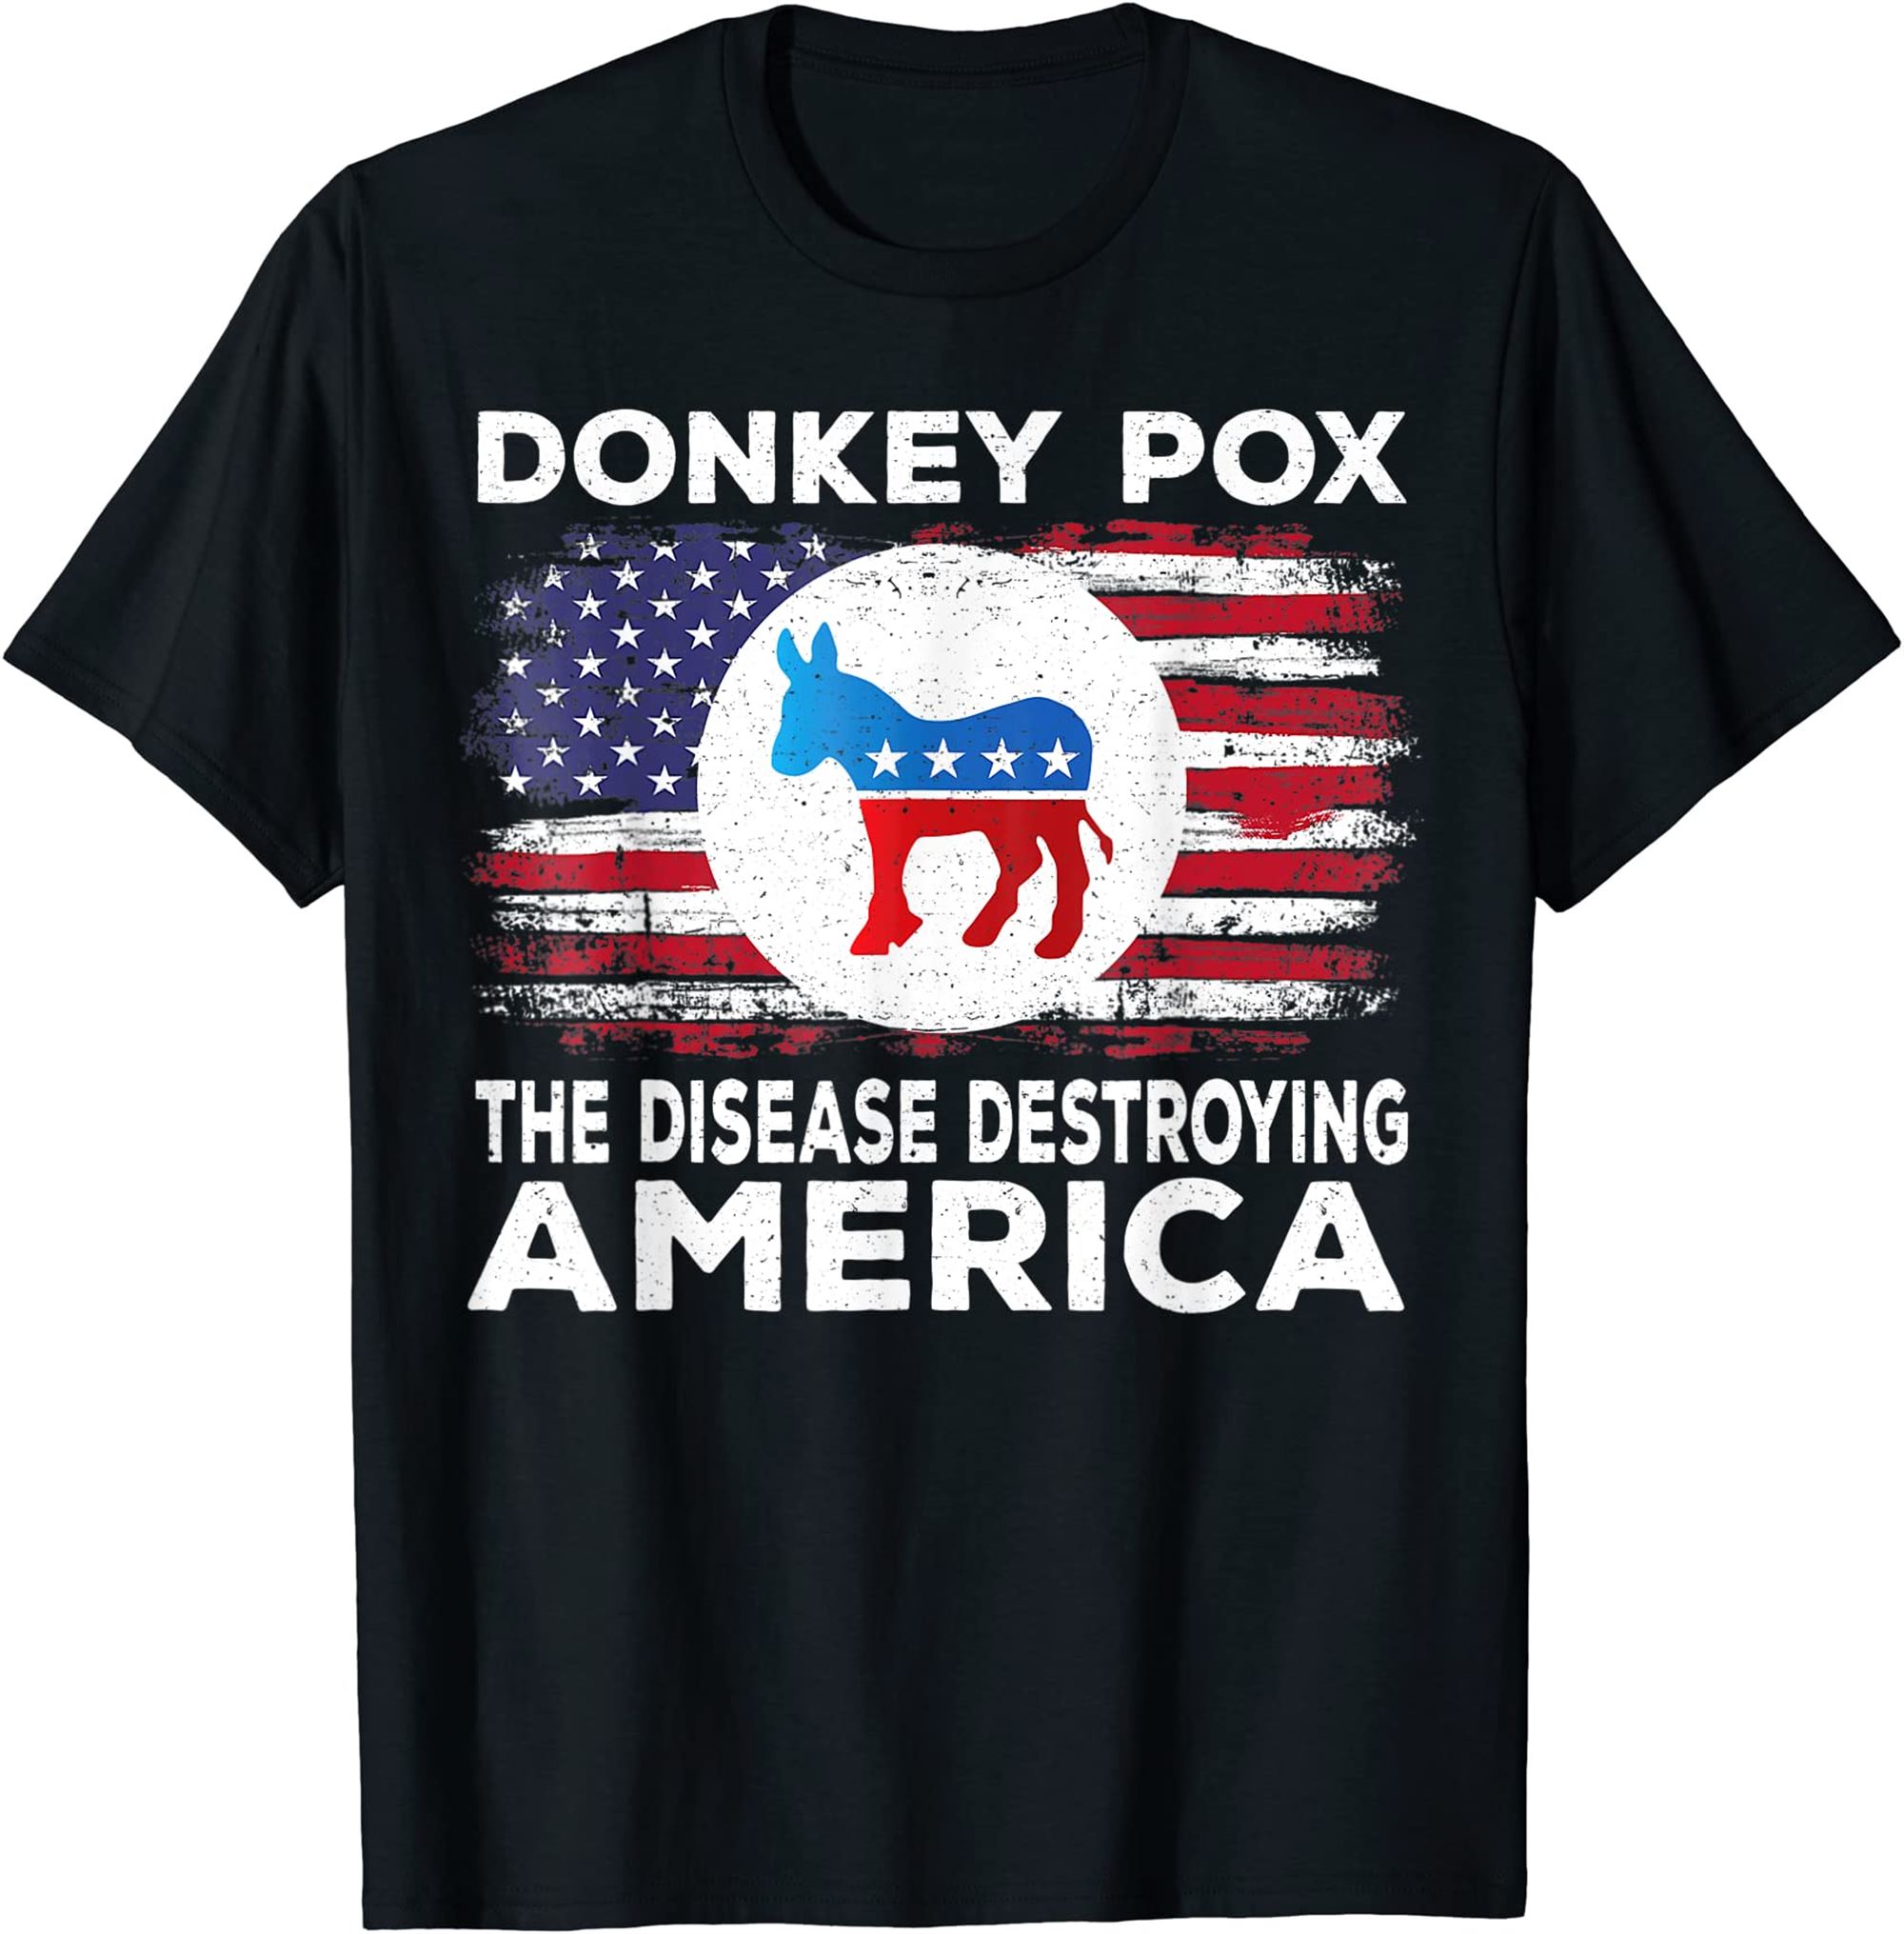 Donkey Pox The Disease Destroying America Funny Republican T-shirt Full Size Up To 5xl